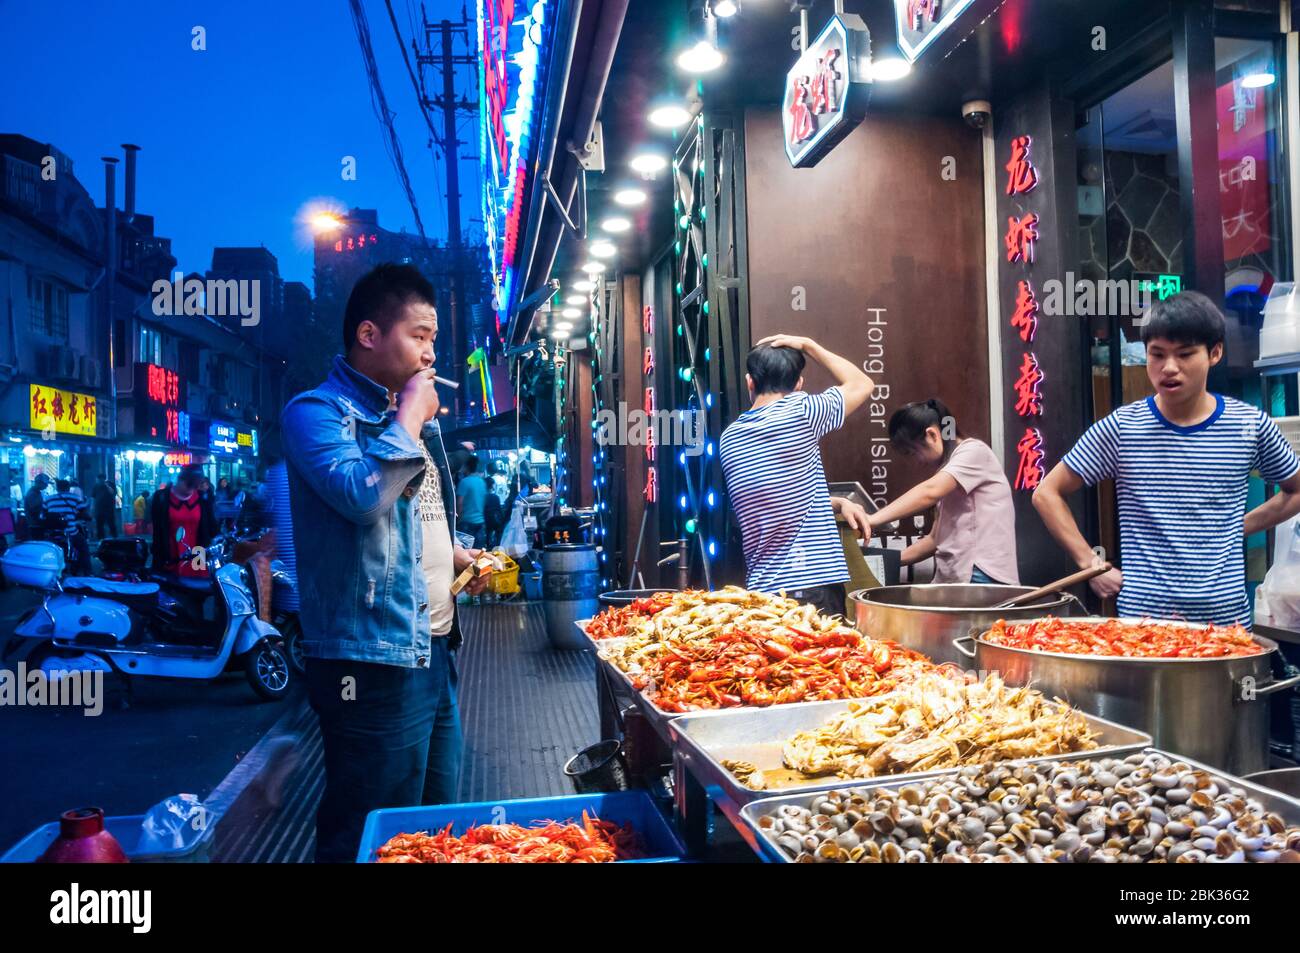 Crayfish (yabbies) along with seafood are the main draw on Shouning Road in Shanghai. Stock Photo